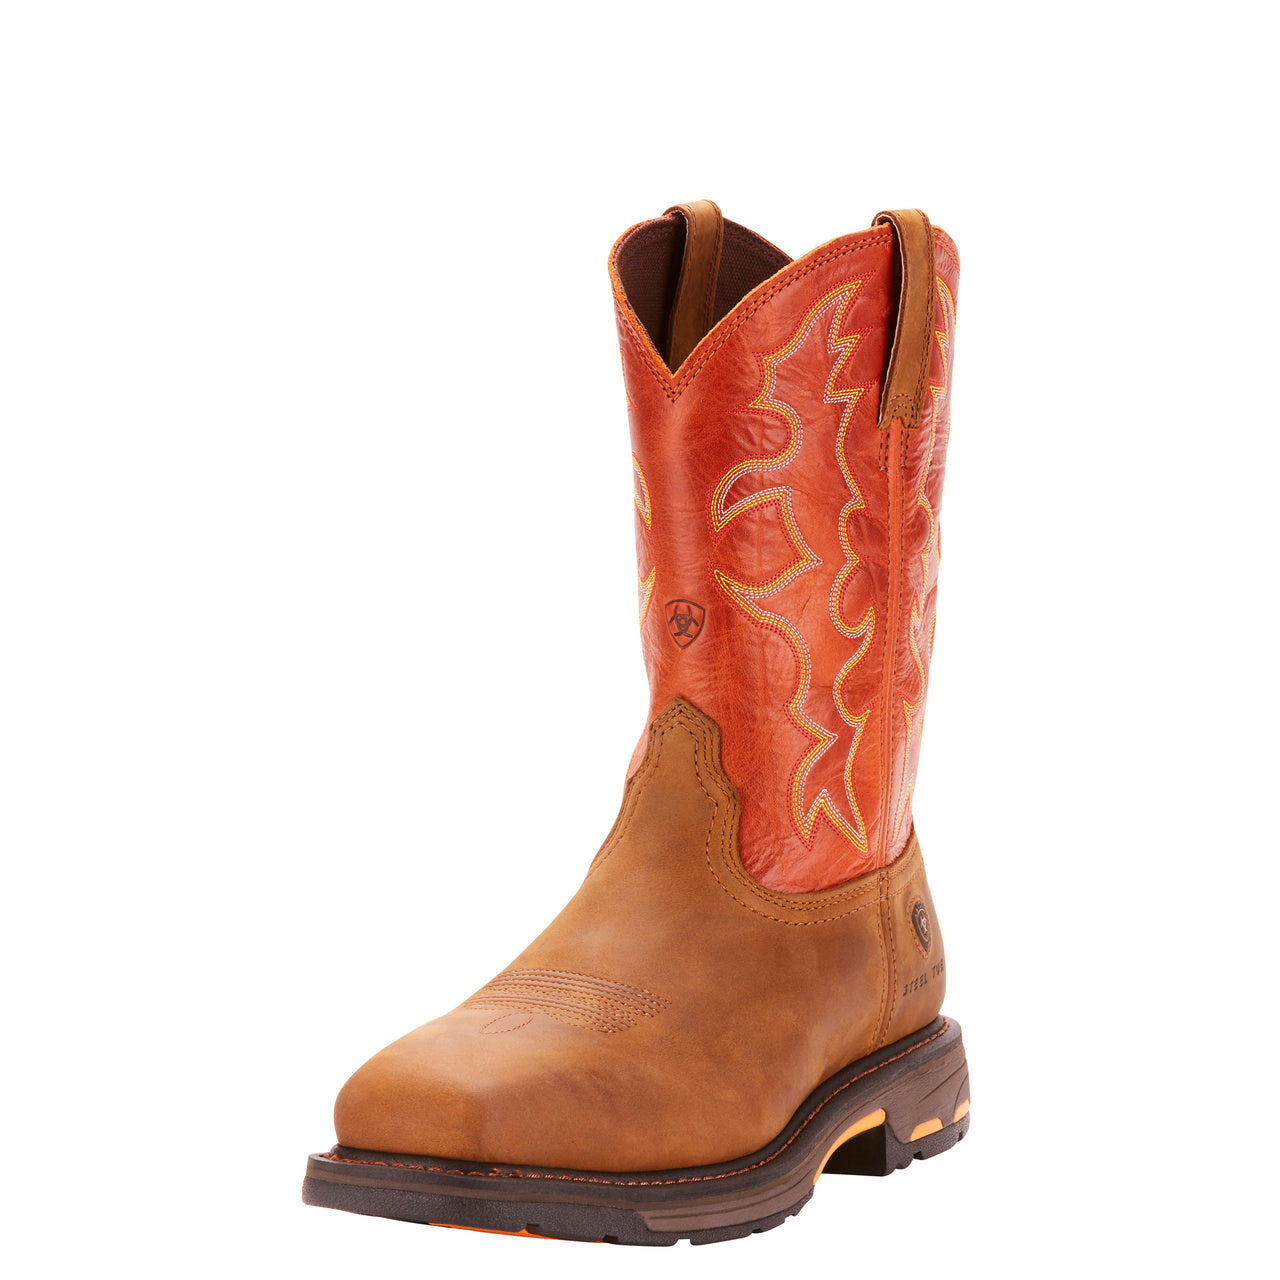 Ariat Workhog Wide Square Toe Boot 11.5 D